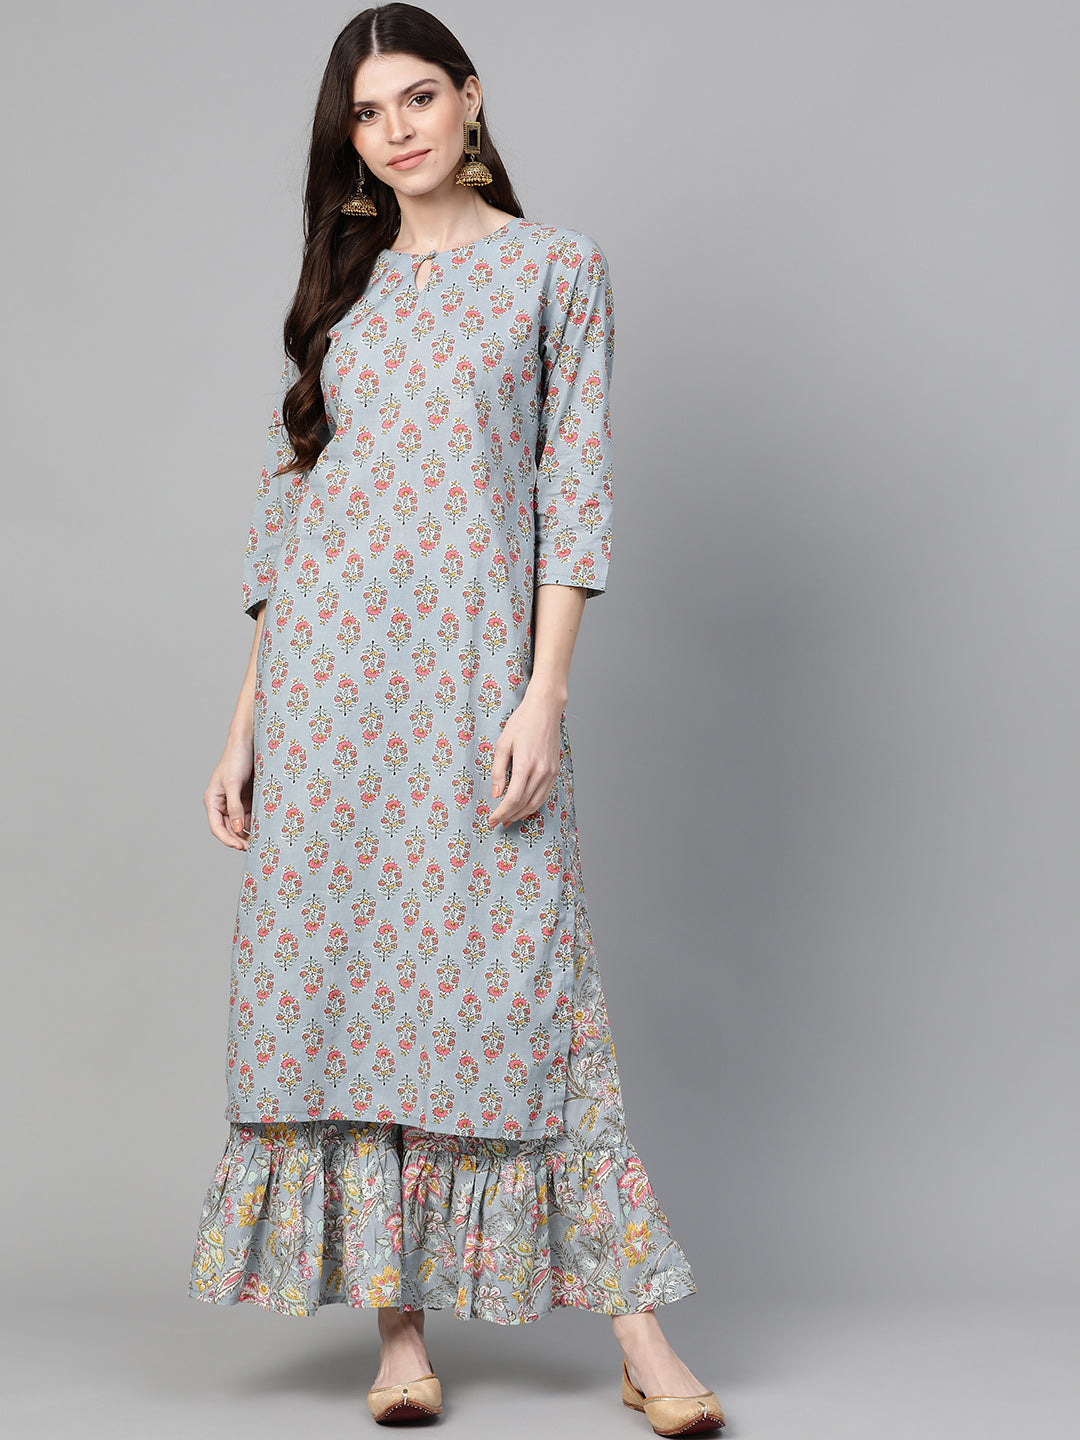 Women's Grey And Pink Floral Print Kurta With Palazzos - Bhama Couture